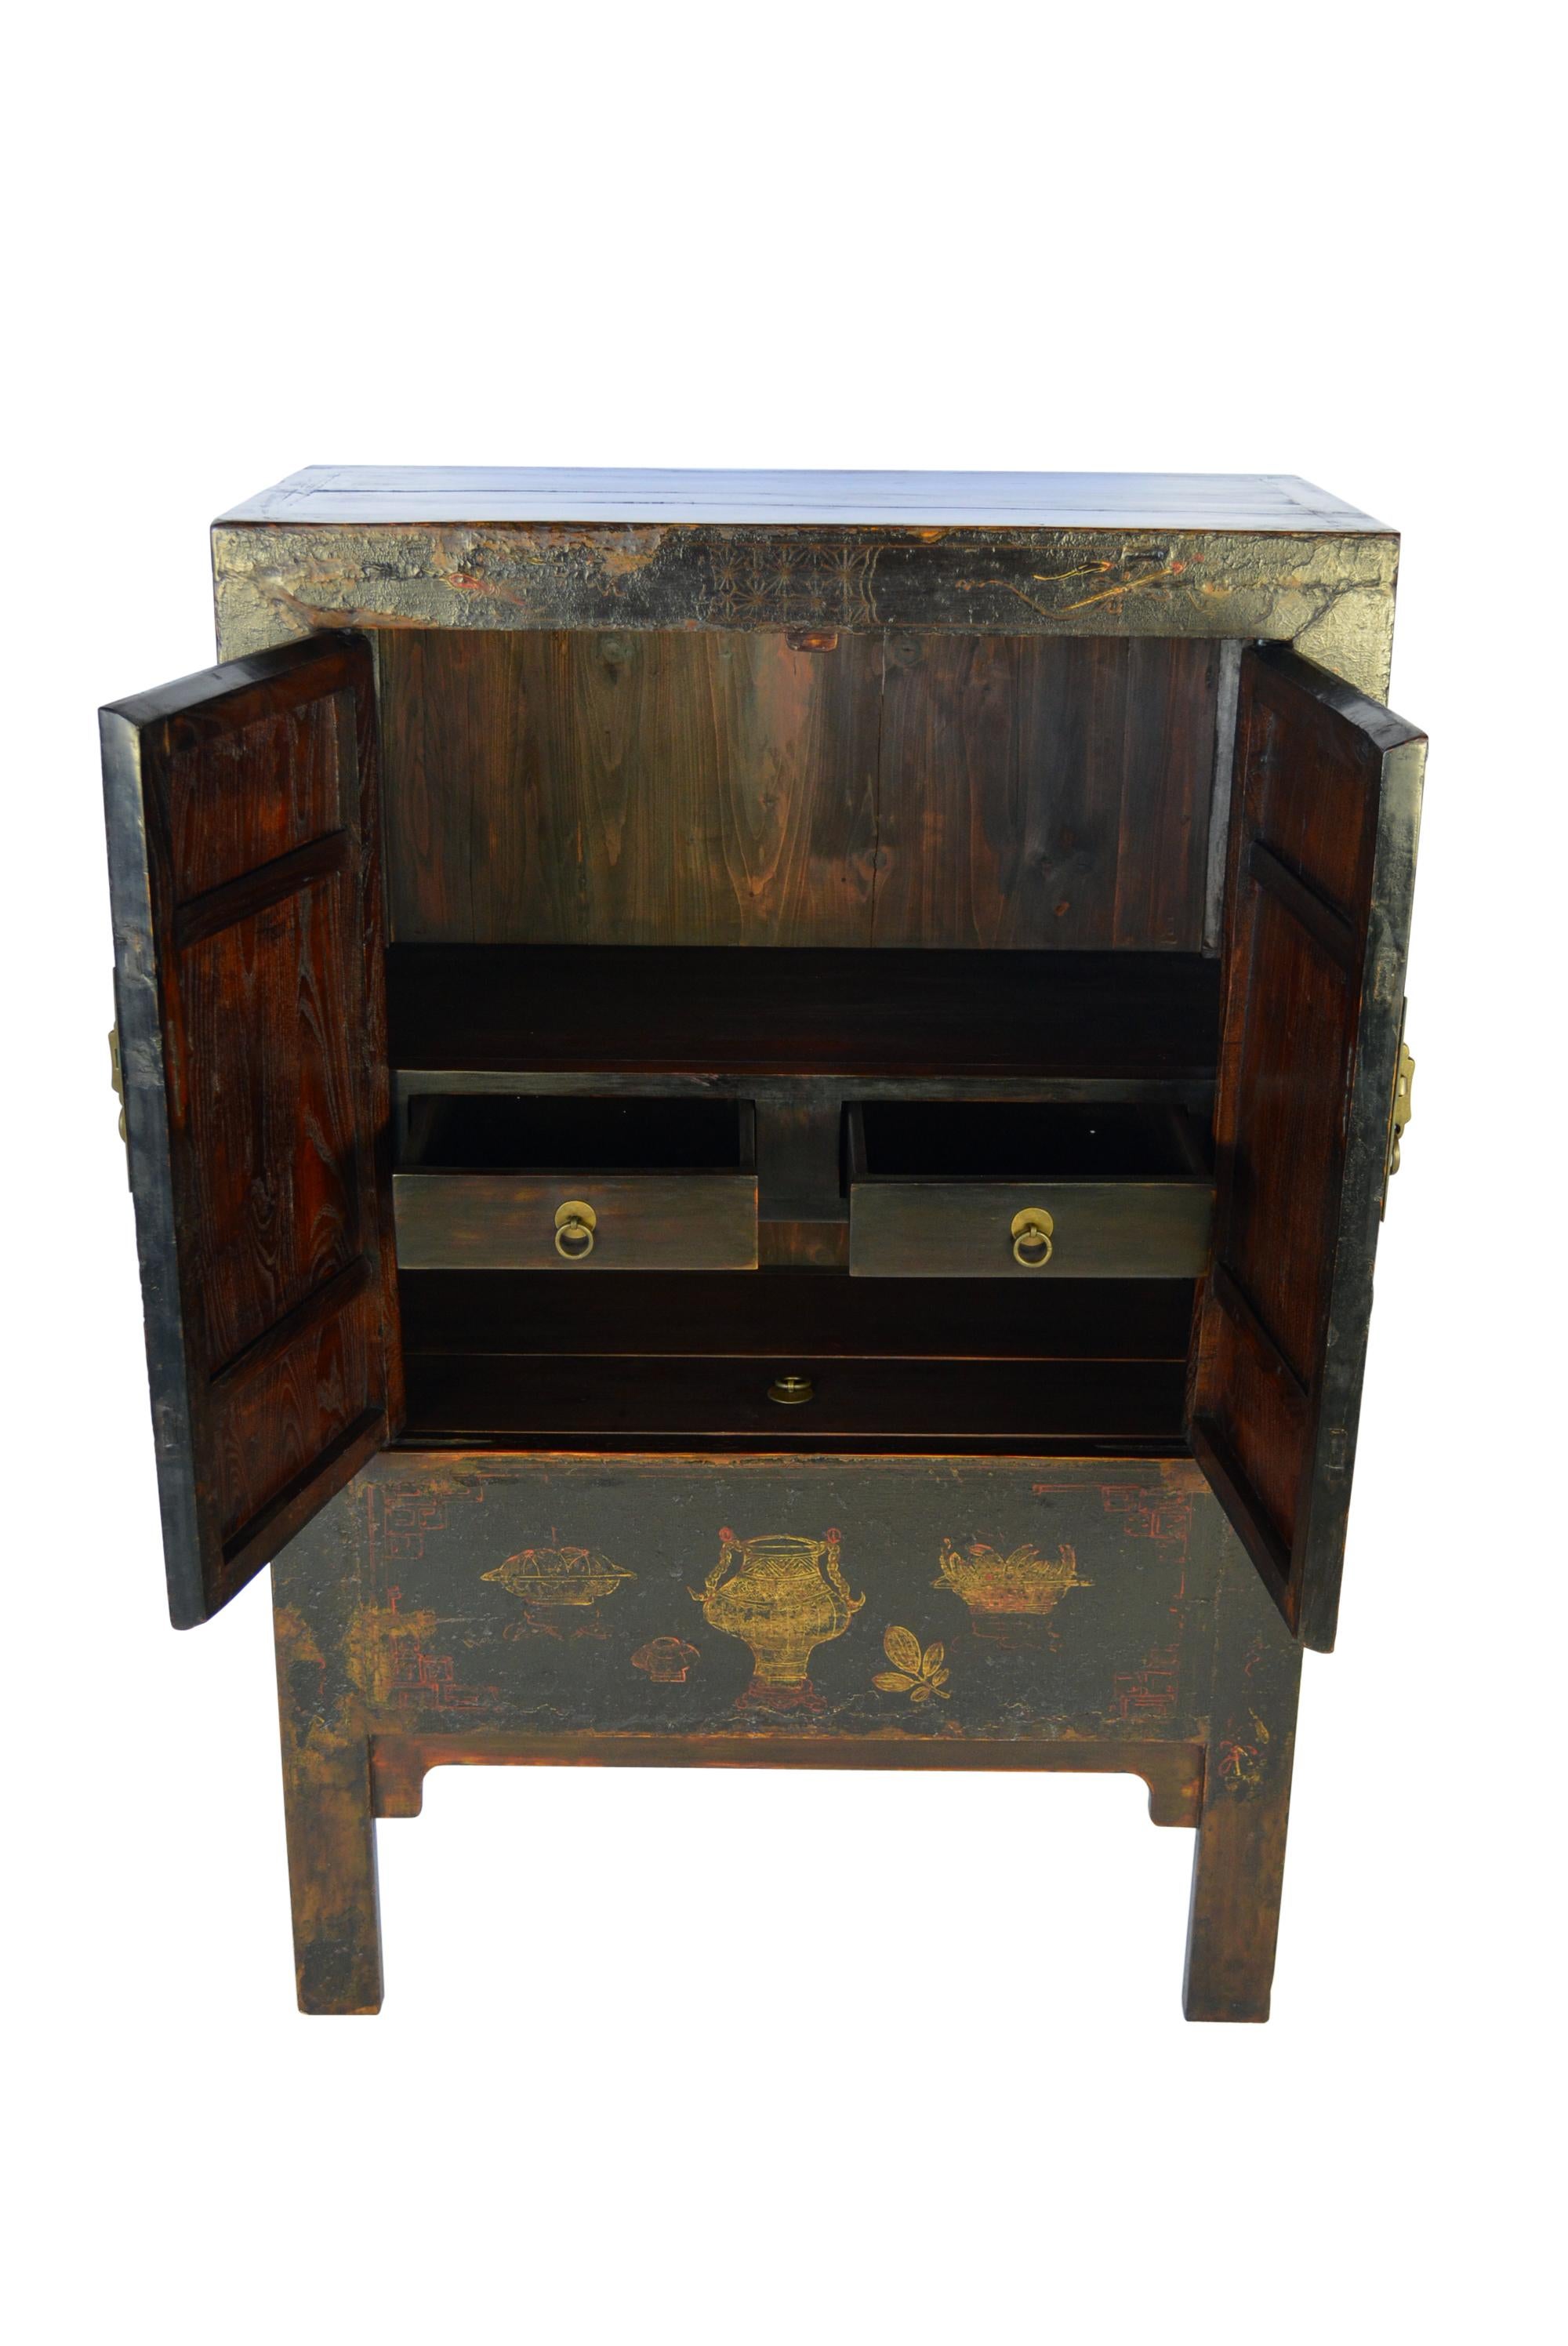 Early 19th Century Black Lacquer Cabinet In Good Condition For Sale In Santa Monica, CA